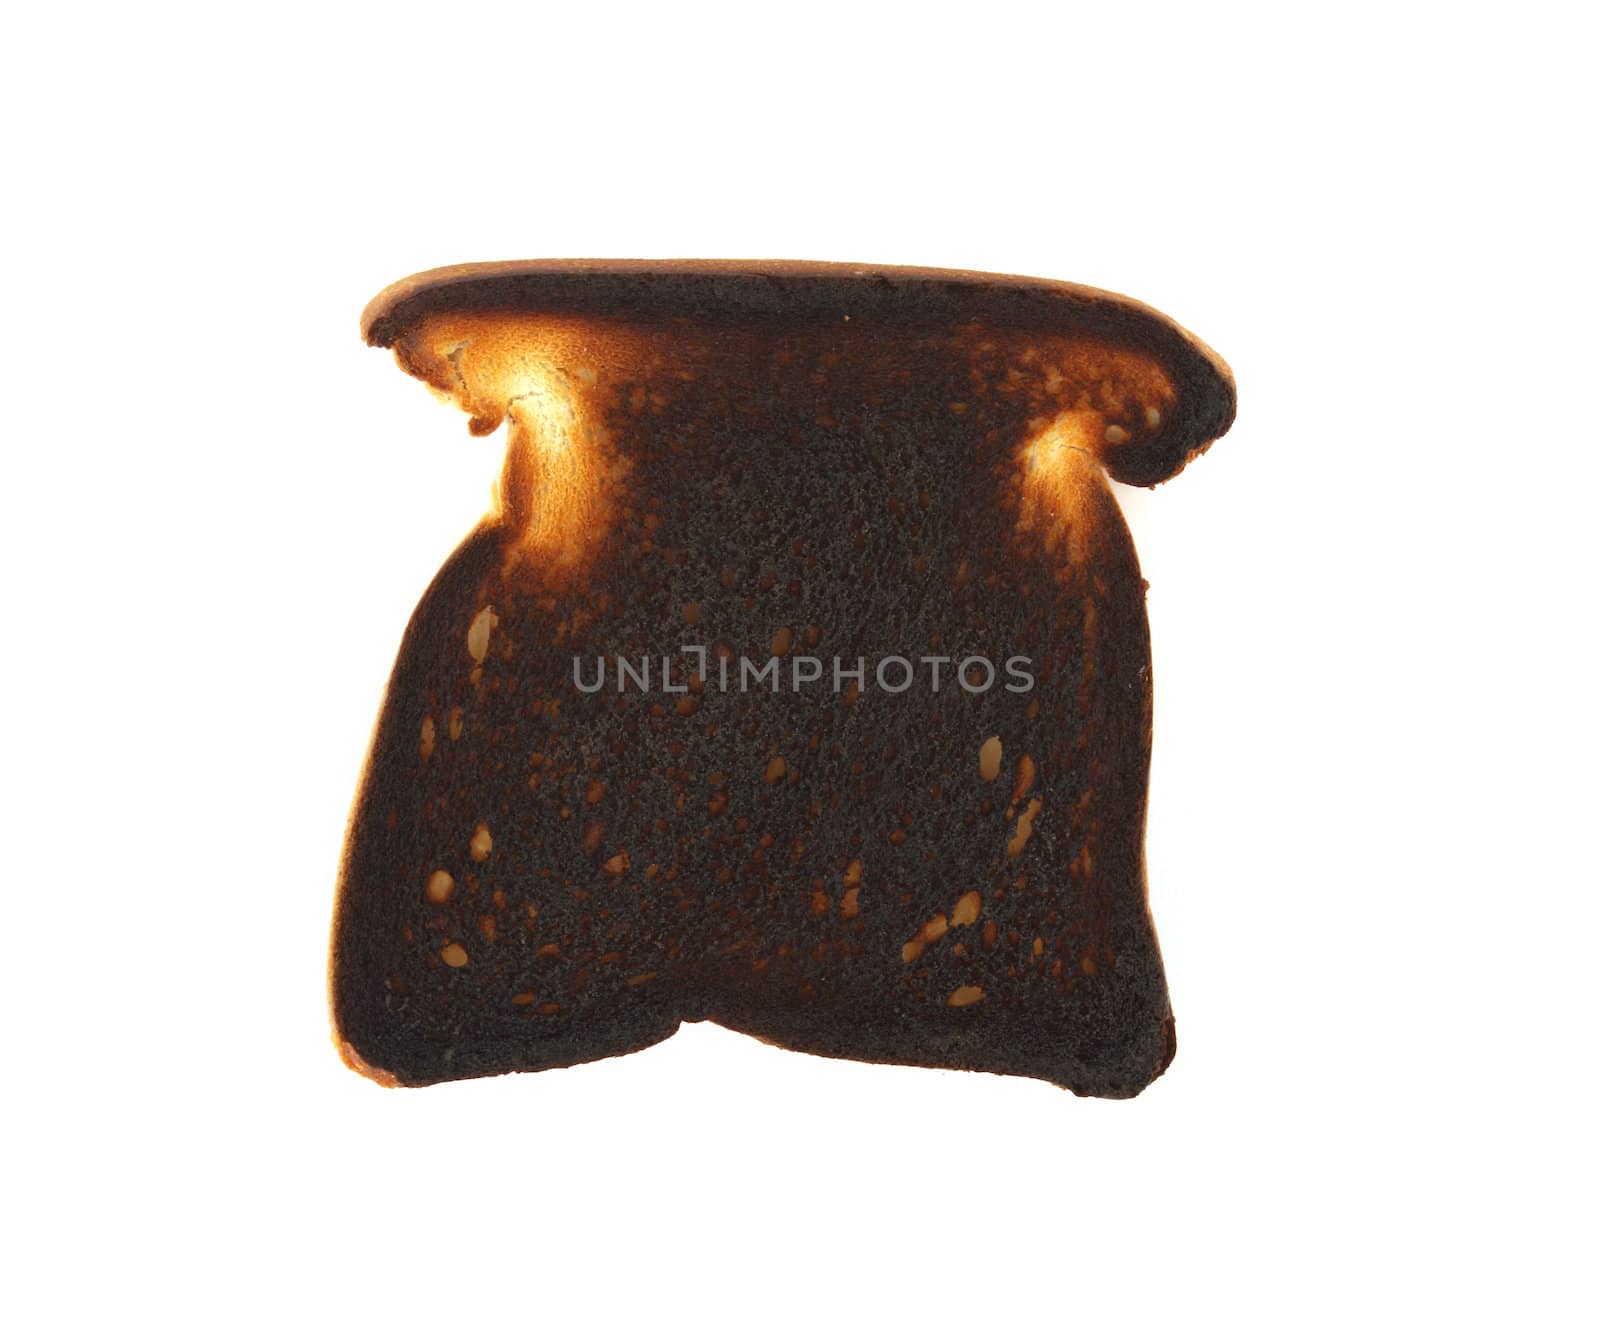 A piece of very burnt toast on white.